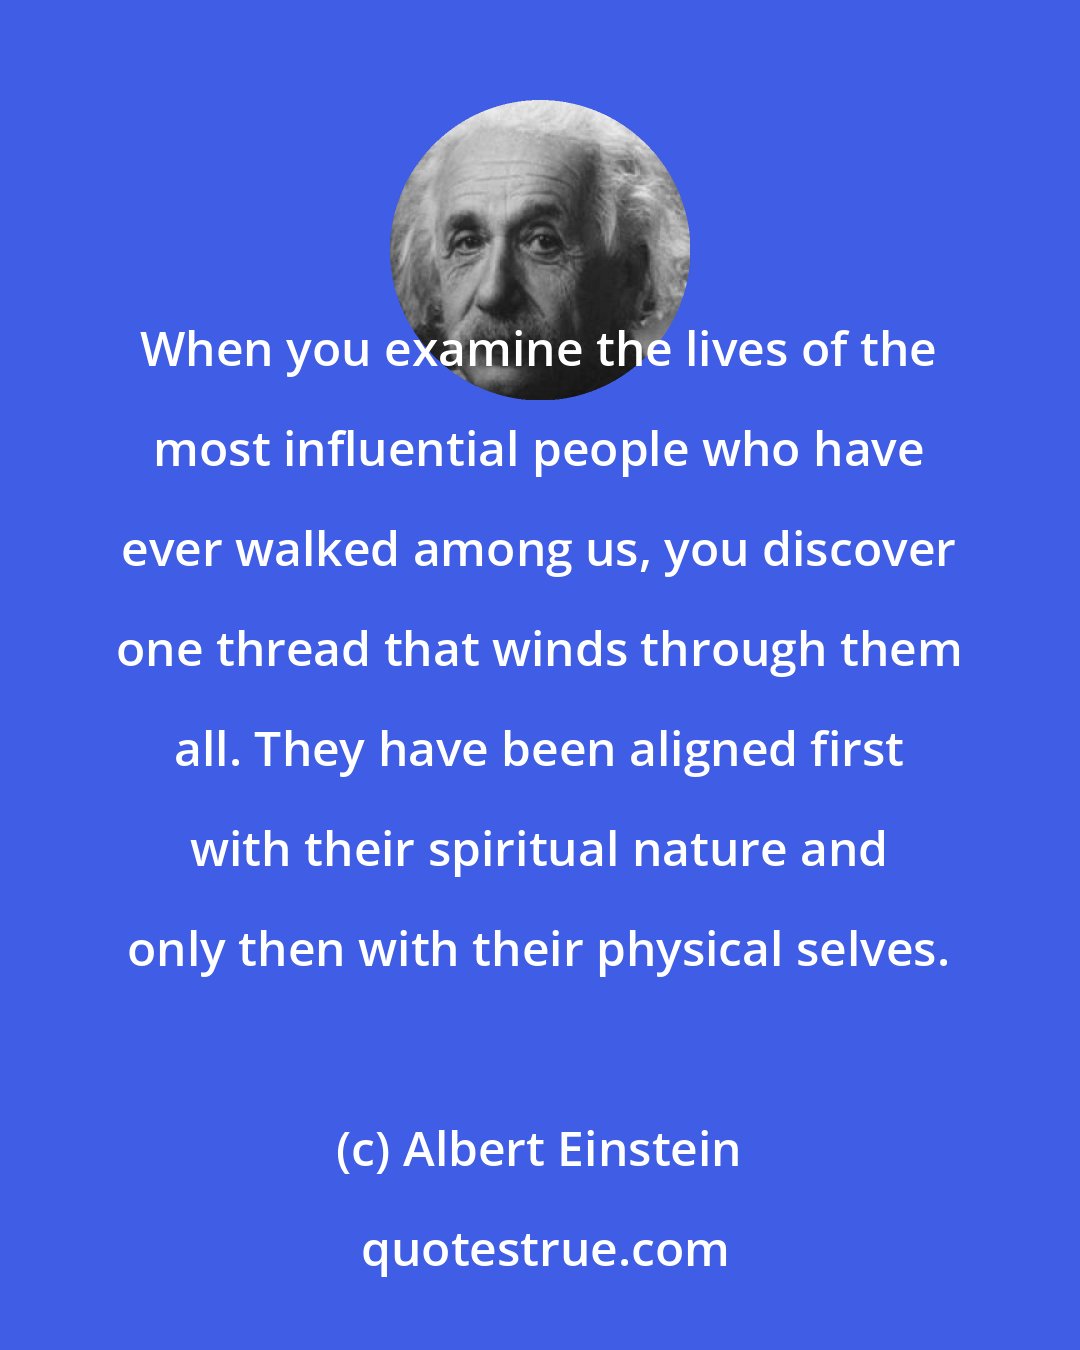 Albert Einstein: When you examine the lives of the most influential people who have ever walked among us, you discover one thread that winds through them all. They have been aligned first with their spiritual nature and only then with their physical selves.